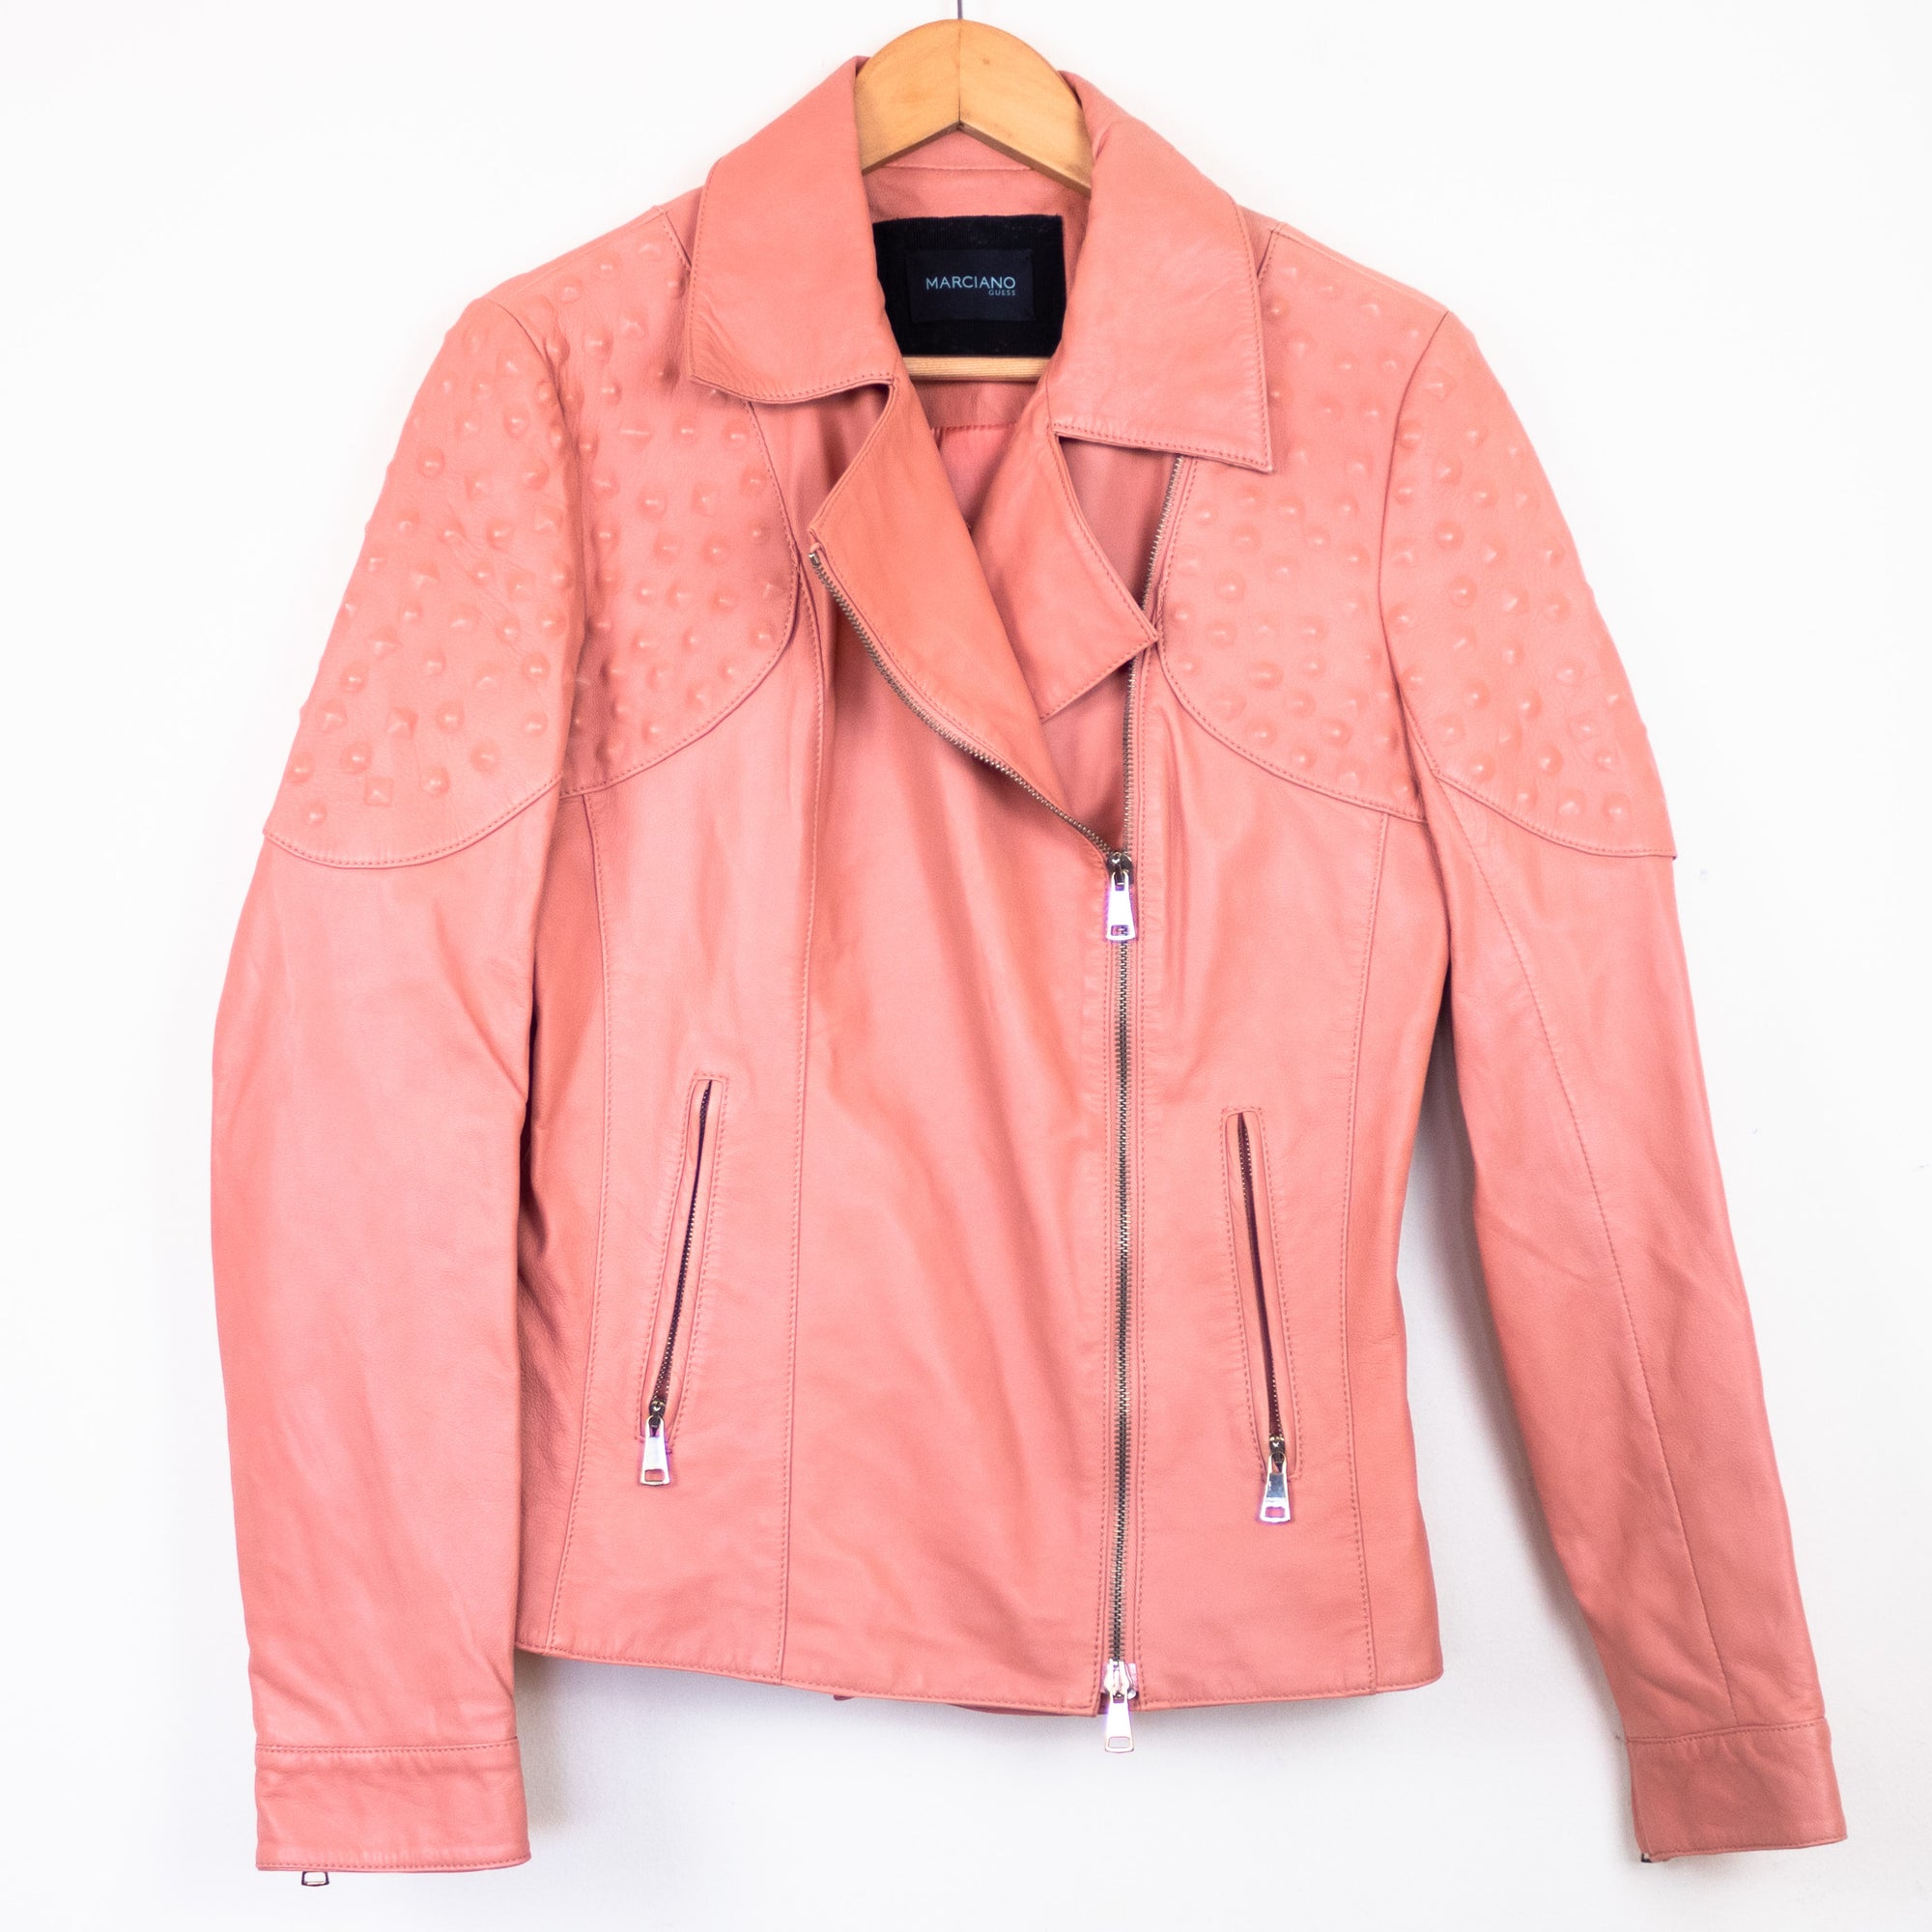 Marciano Jacket by Guess